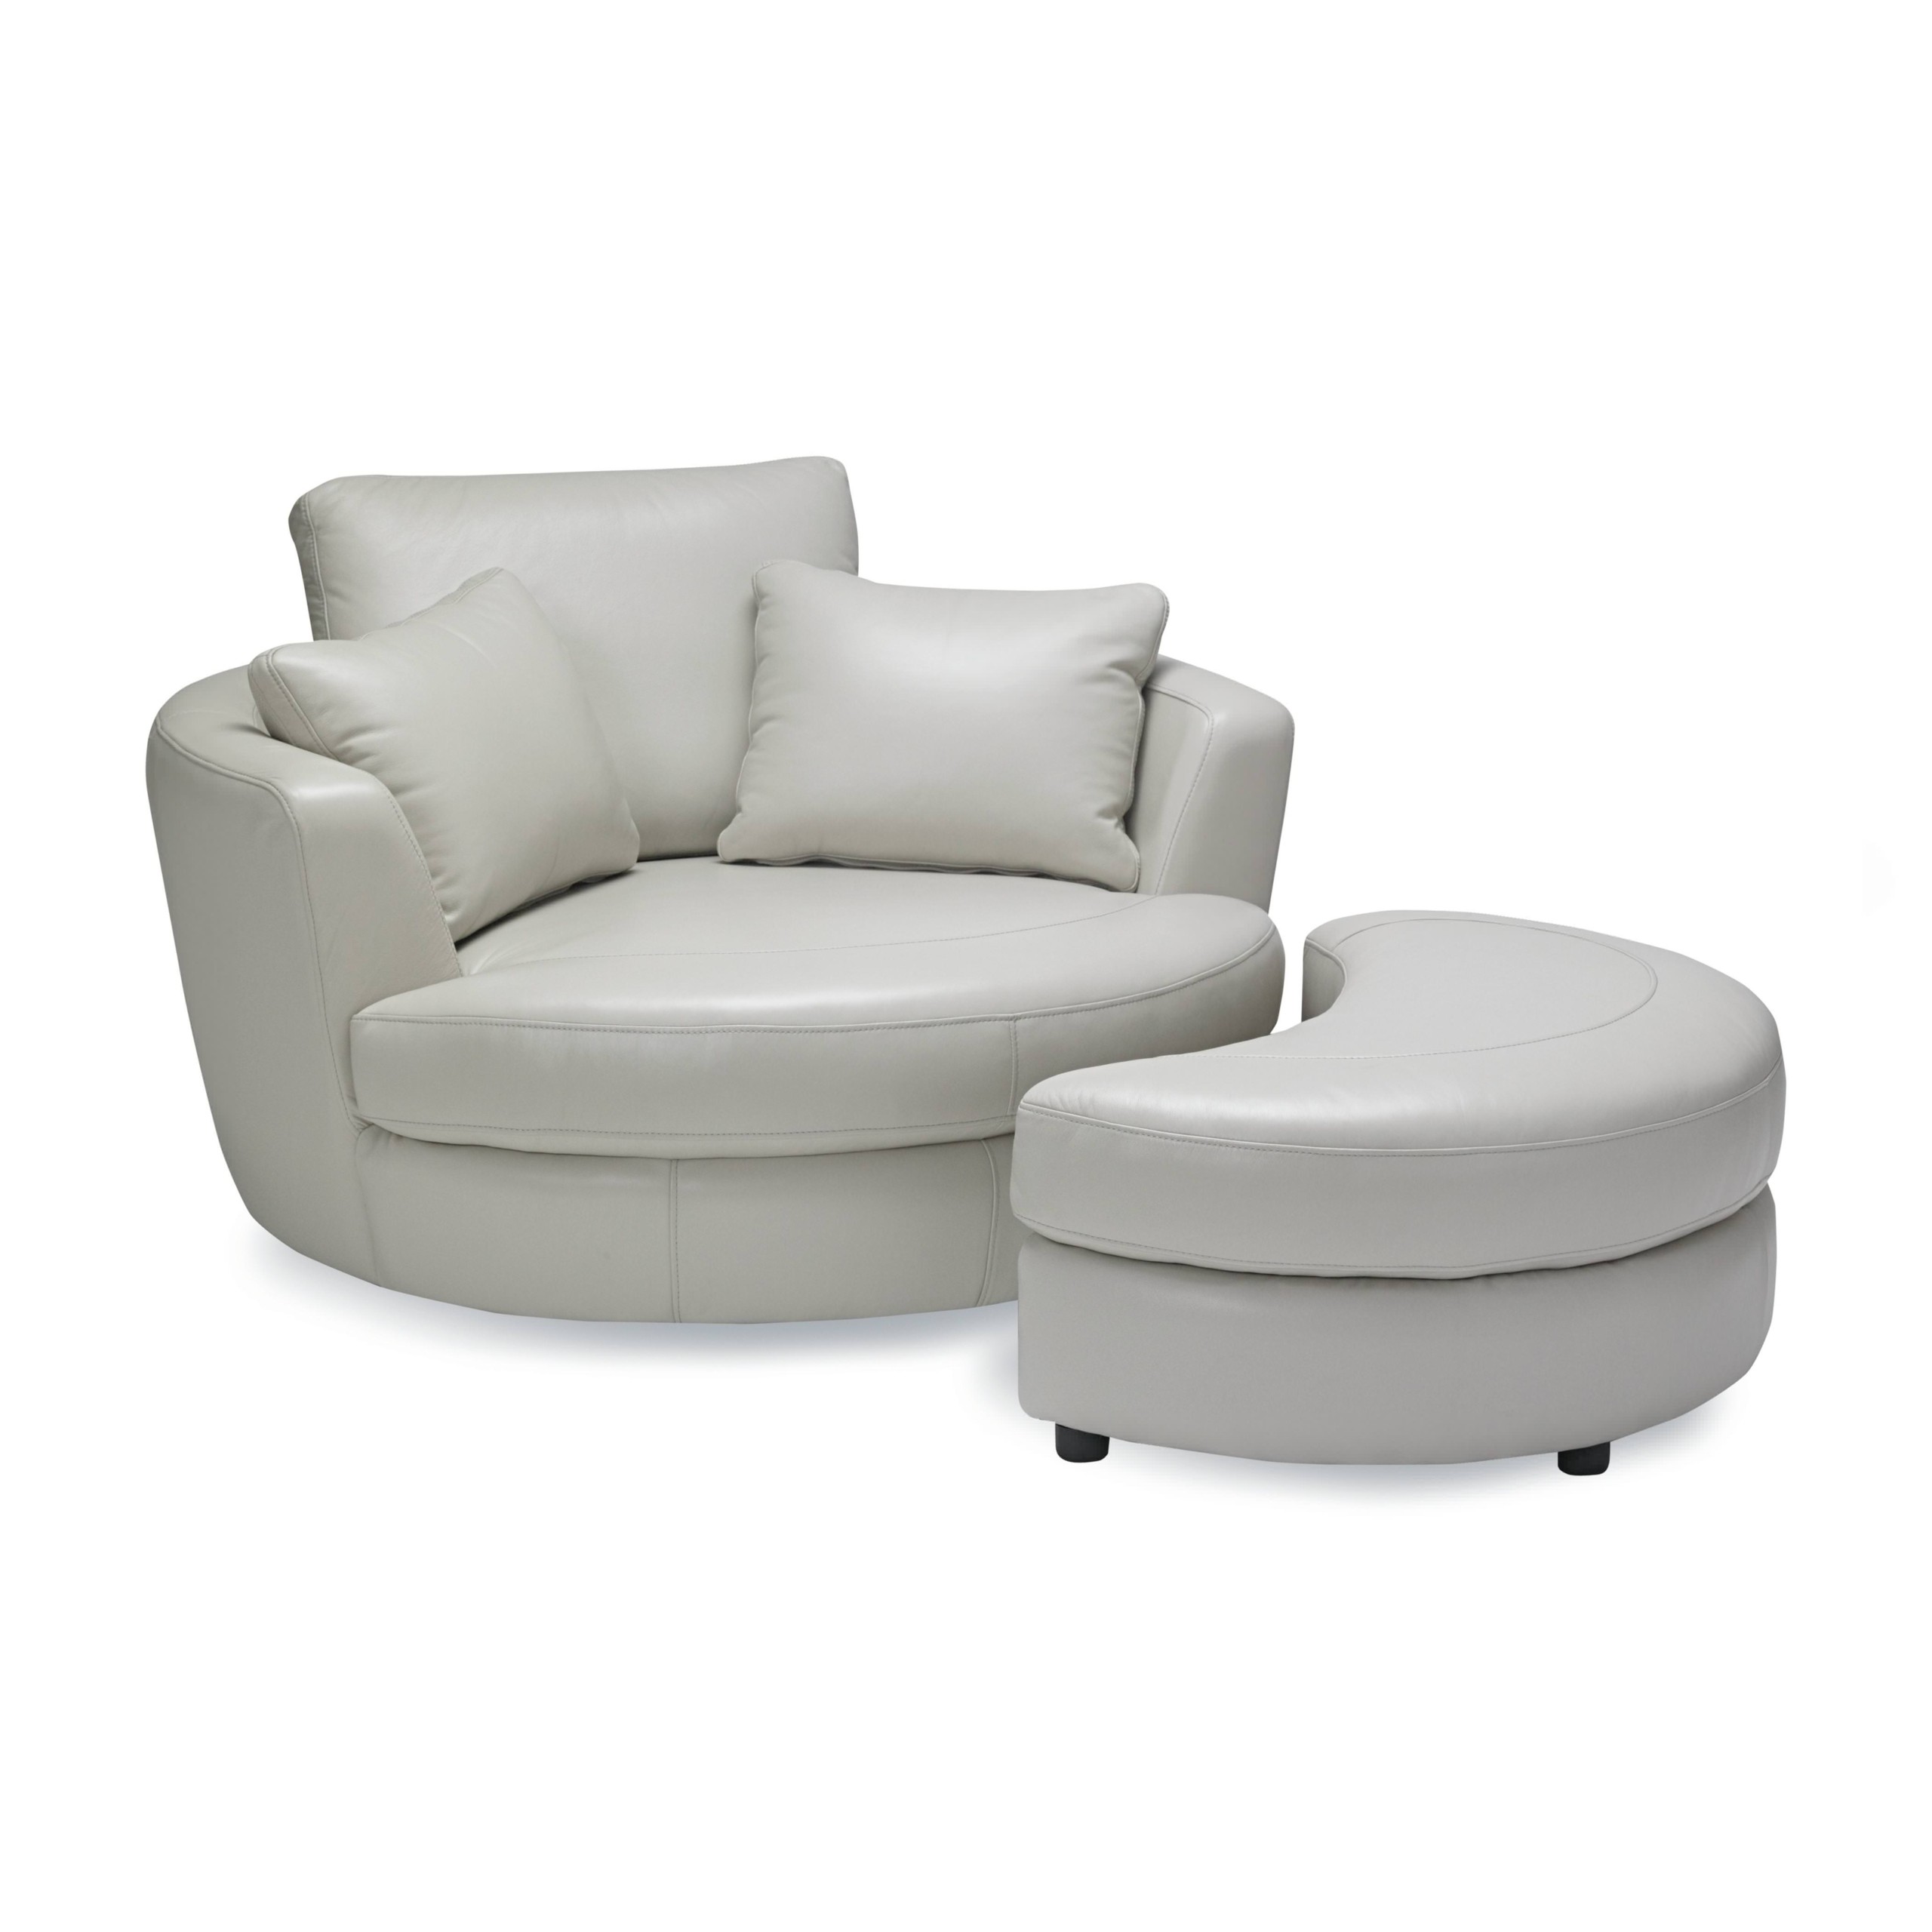 Cuddle Swivel Chair and Ottoman